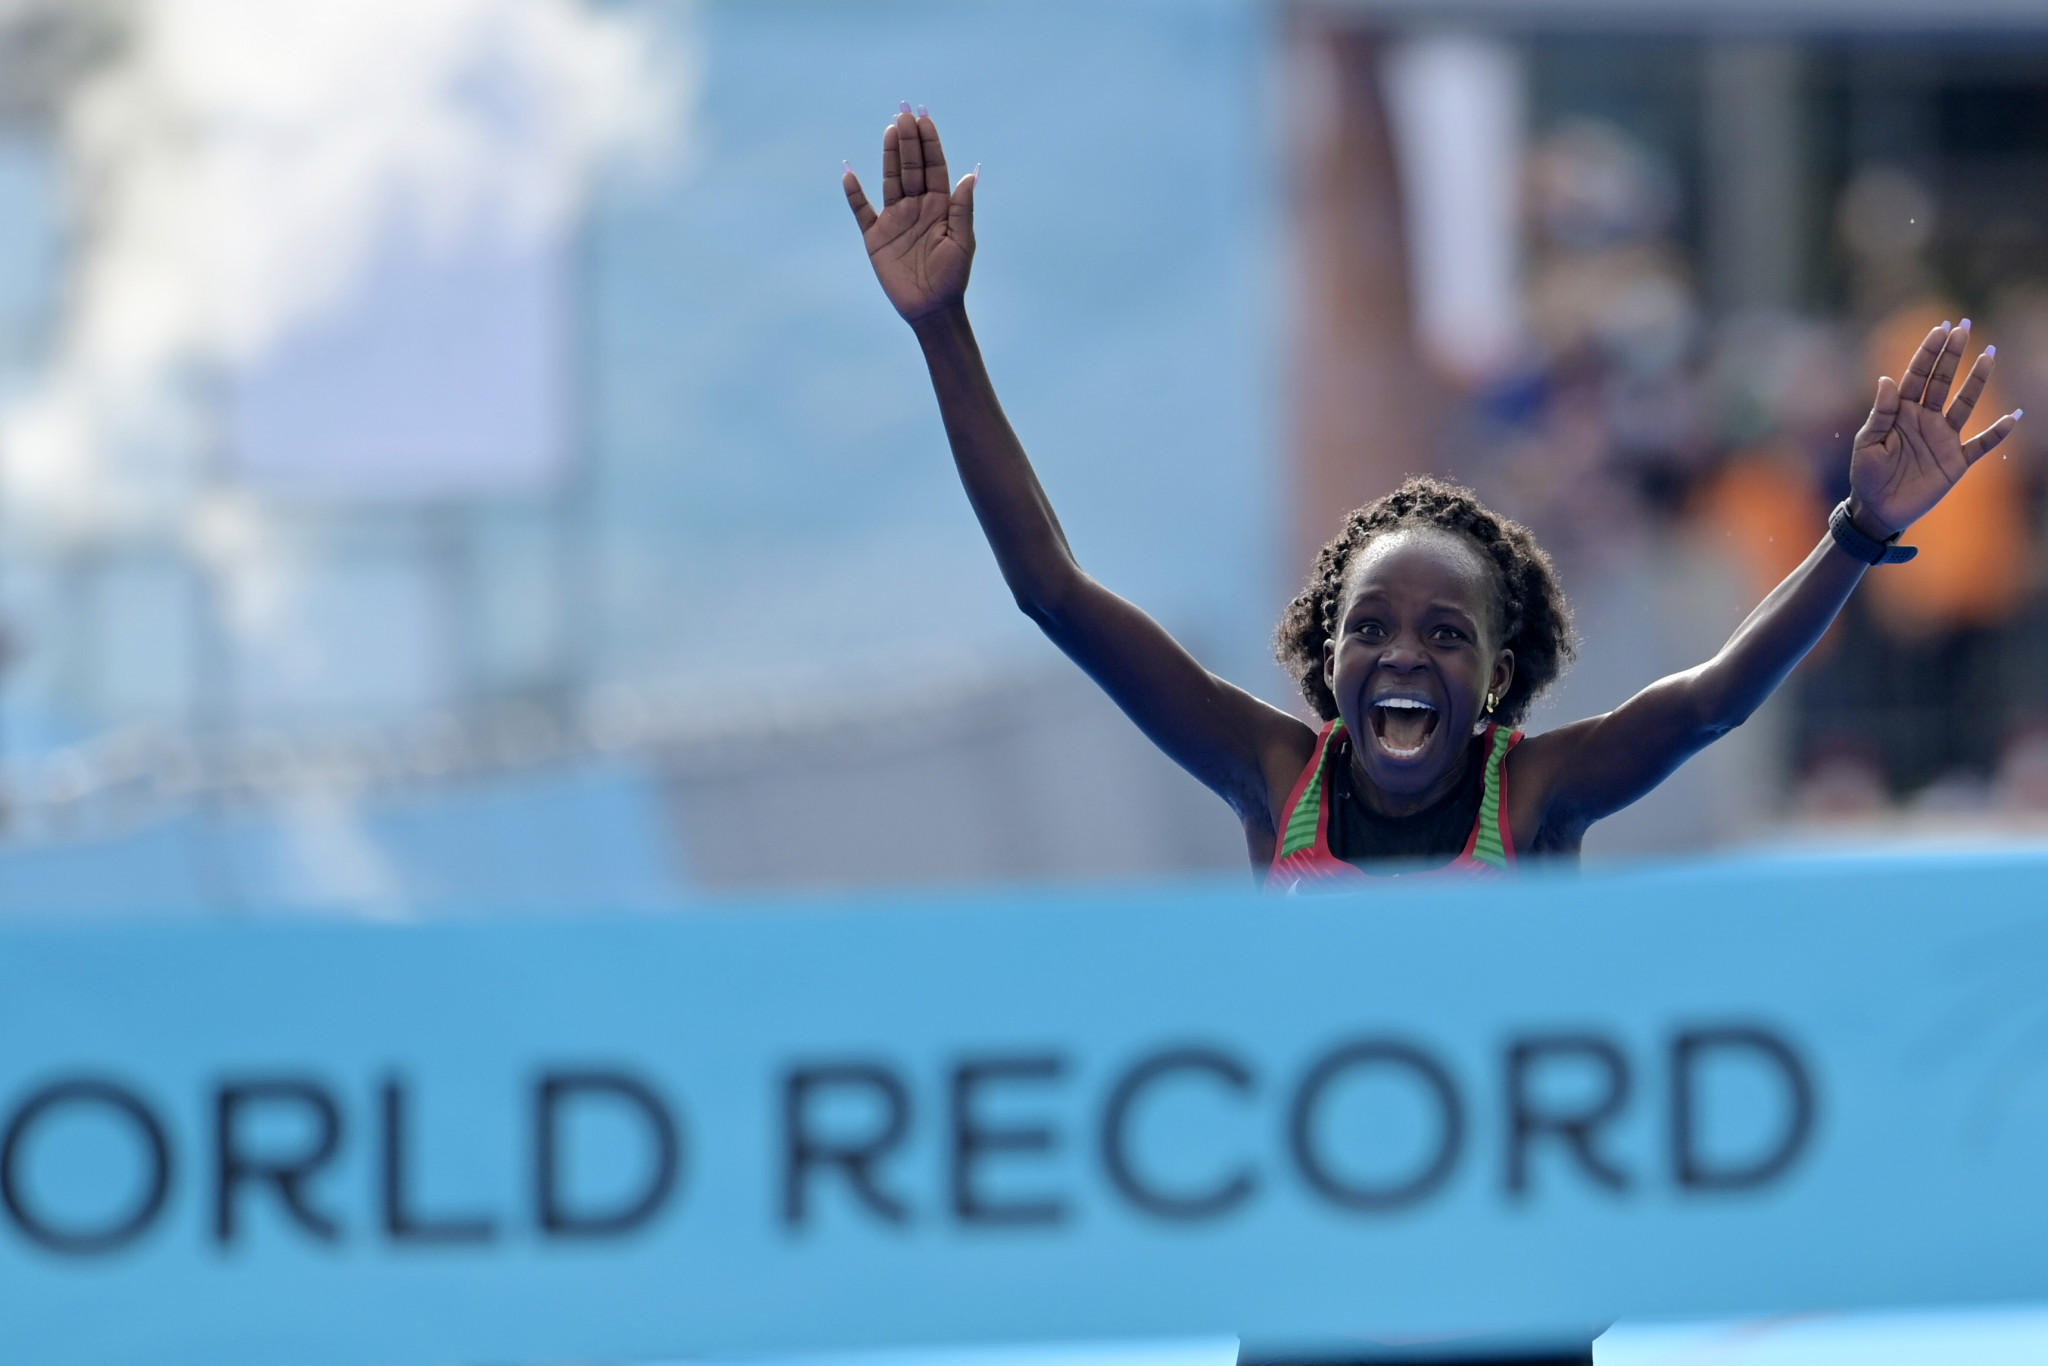 Kenya’s Peres Jepchirchir broke her own women-only race world record in regaining the World Athletics Half Marathon title in Gdynia ©Getty Images